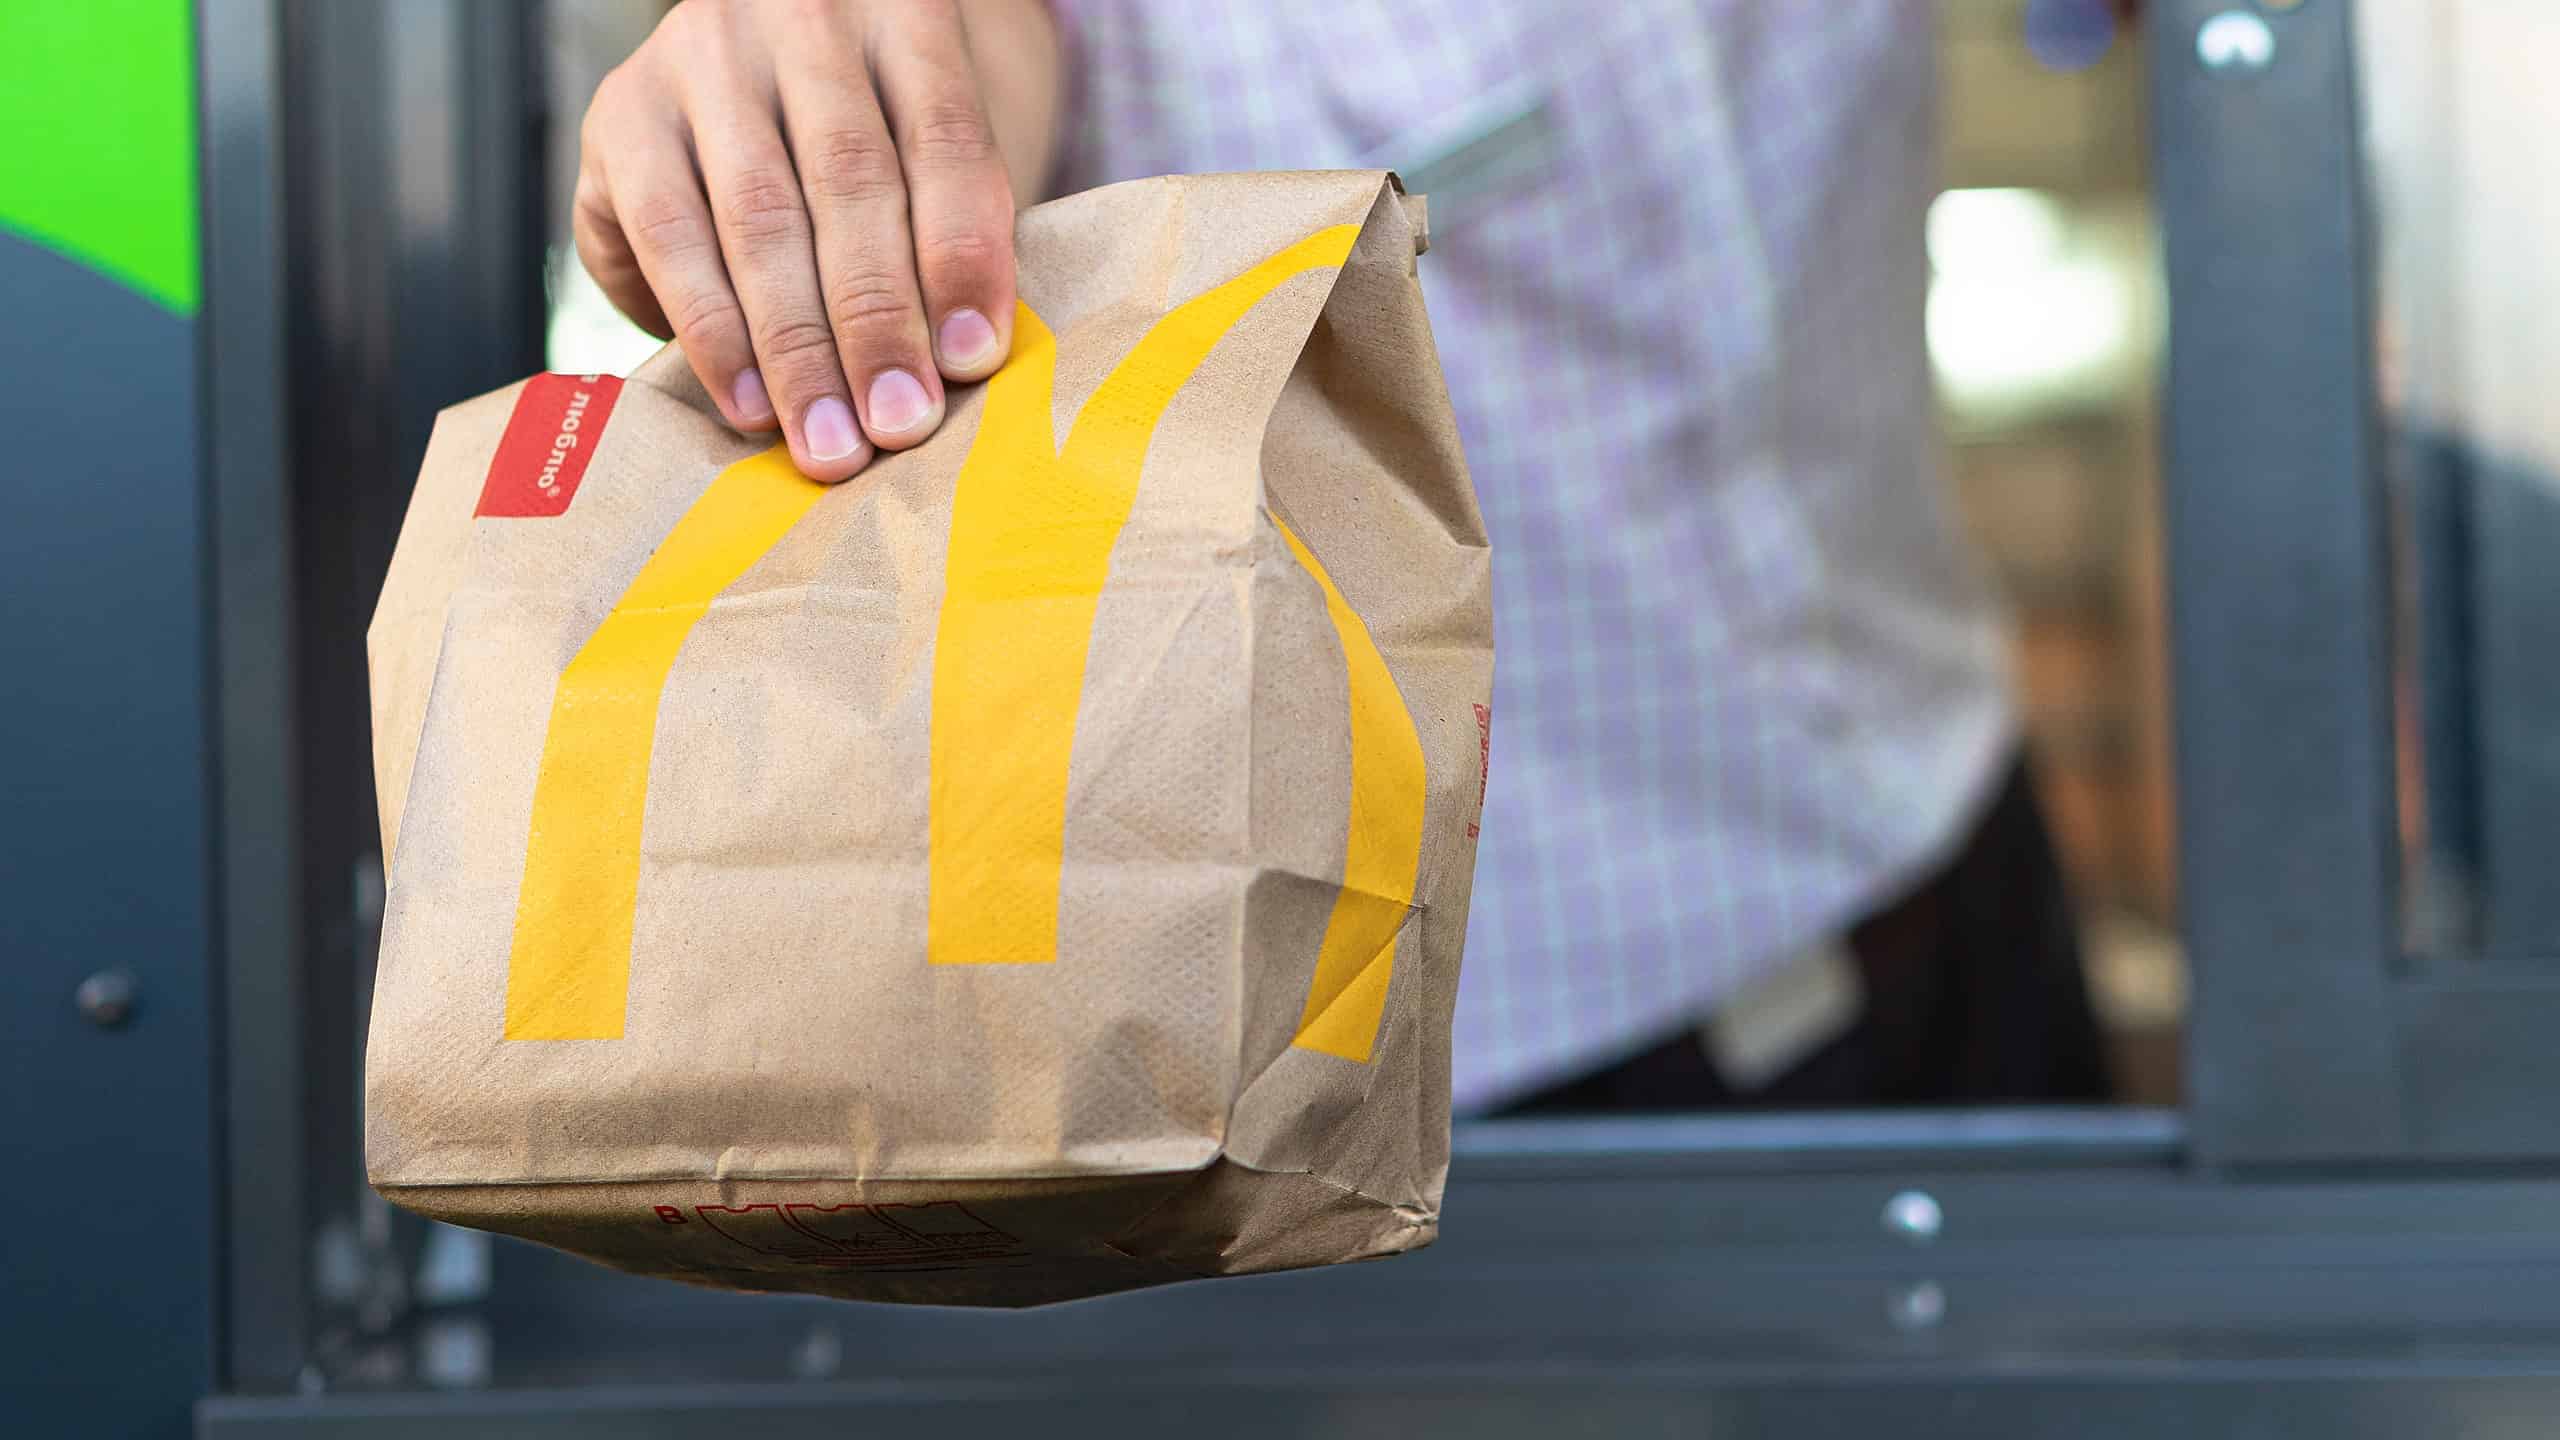 Man hands fast food bag out the drive-thru window